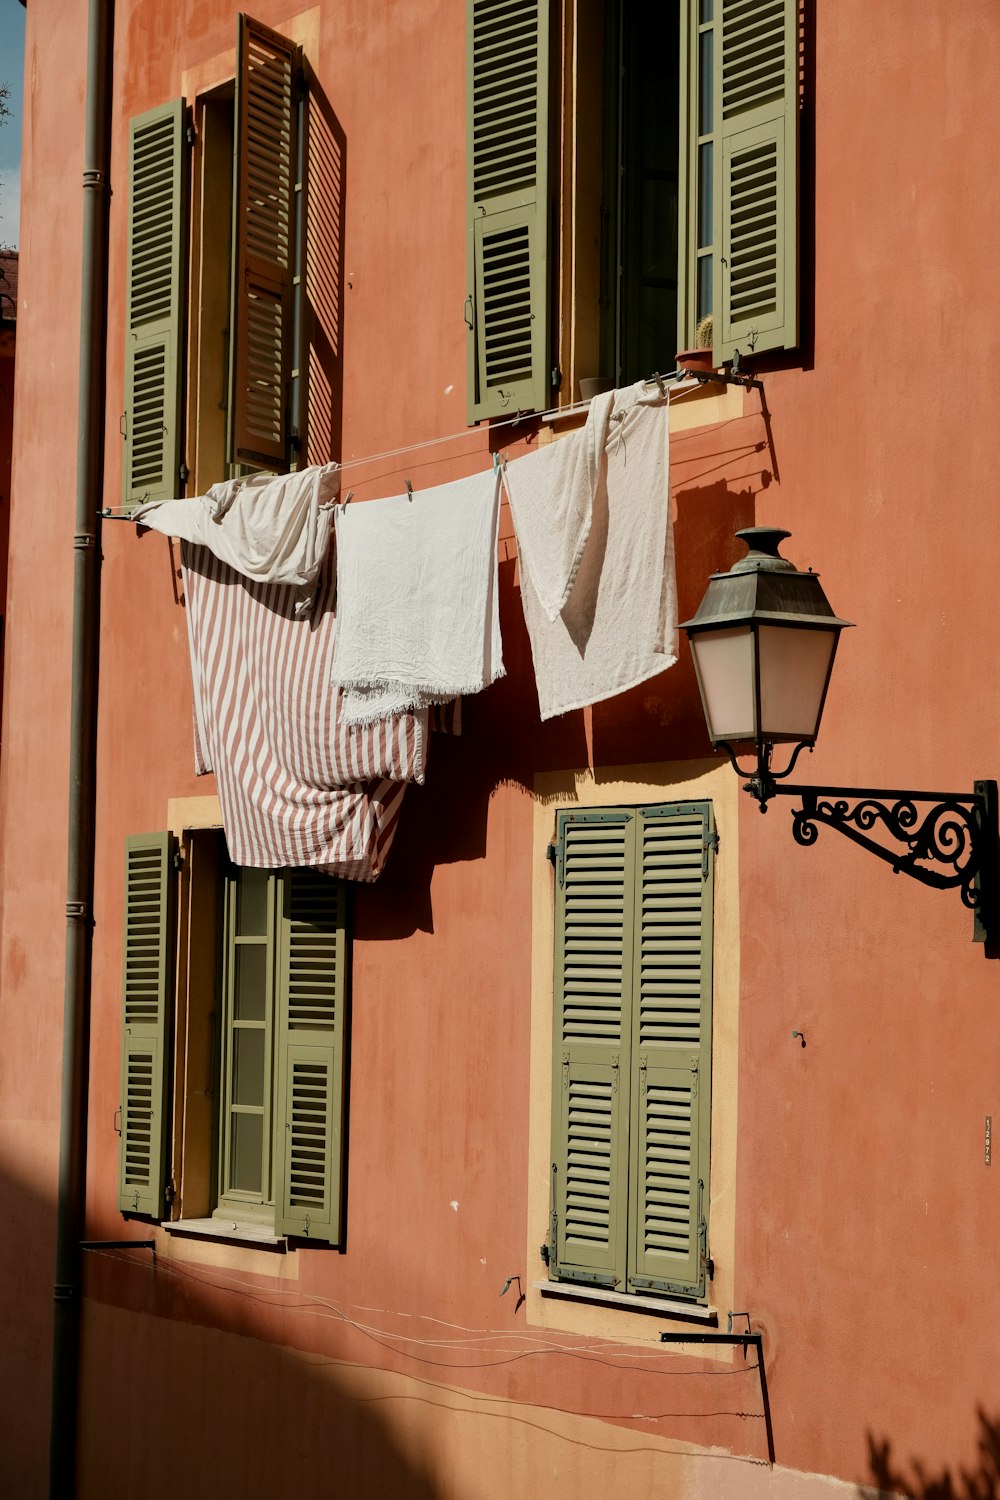 clothes hanging out to dry in front of a building